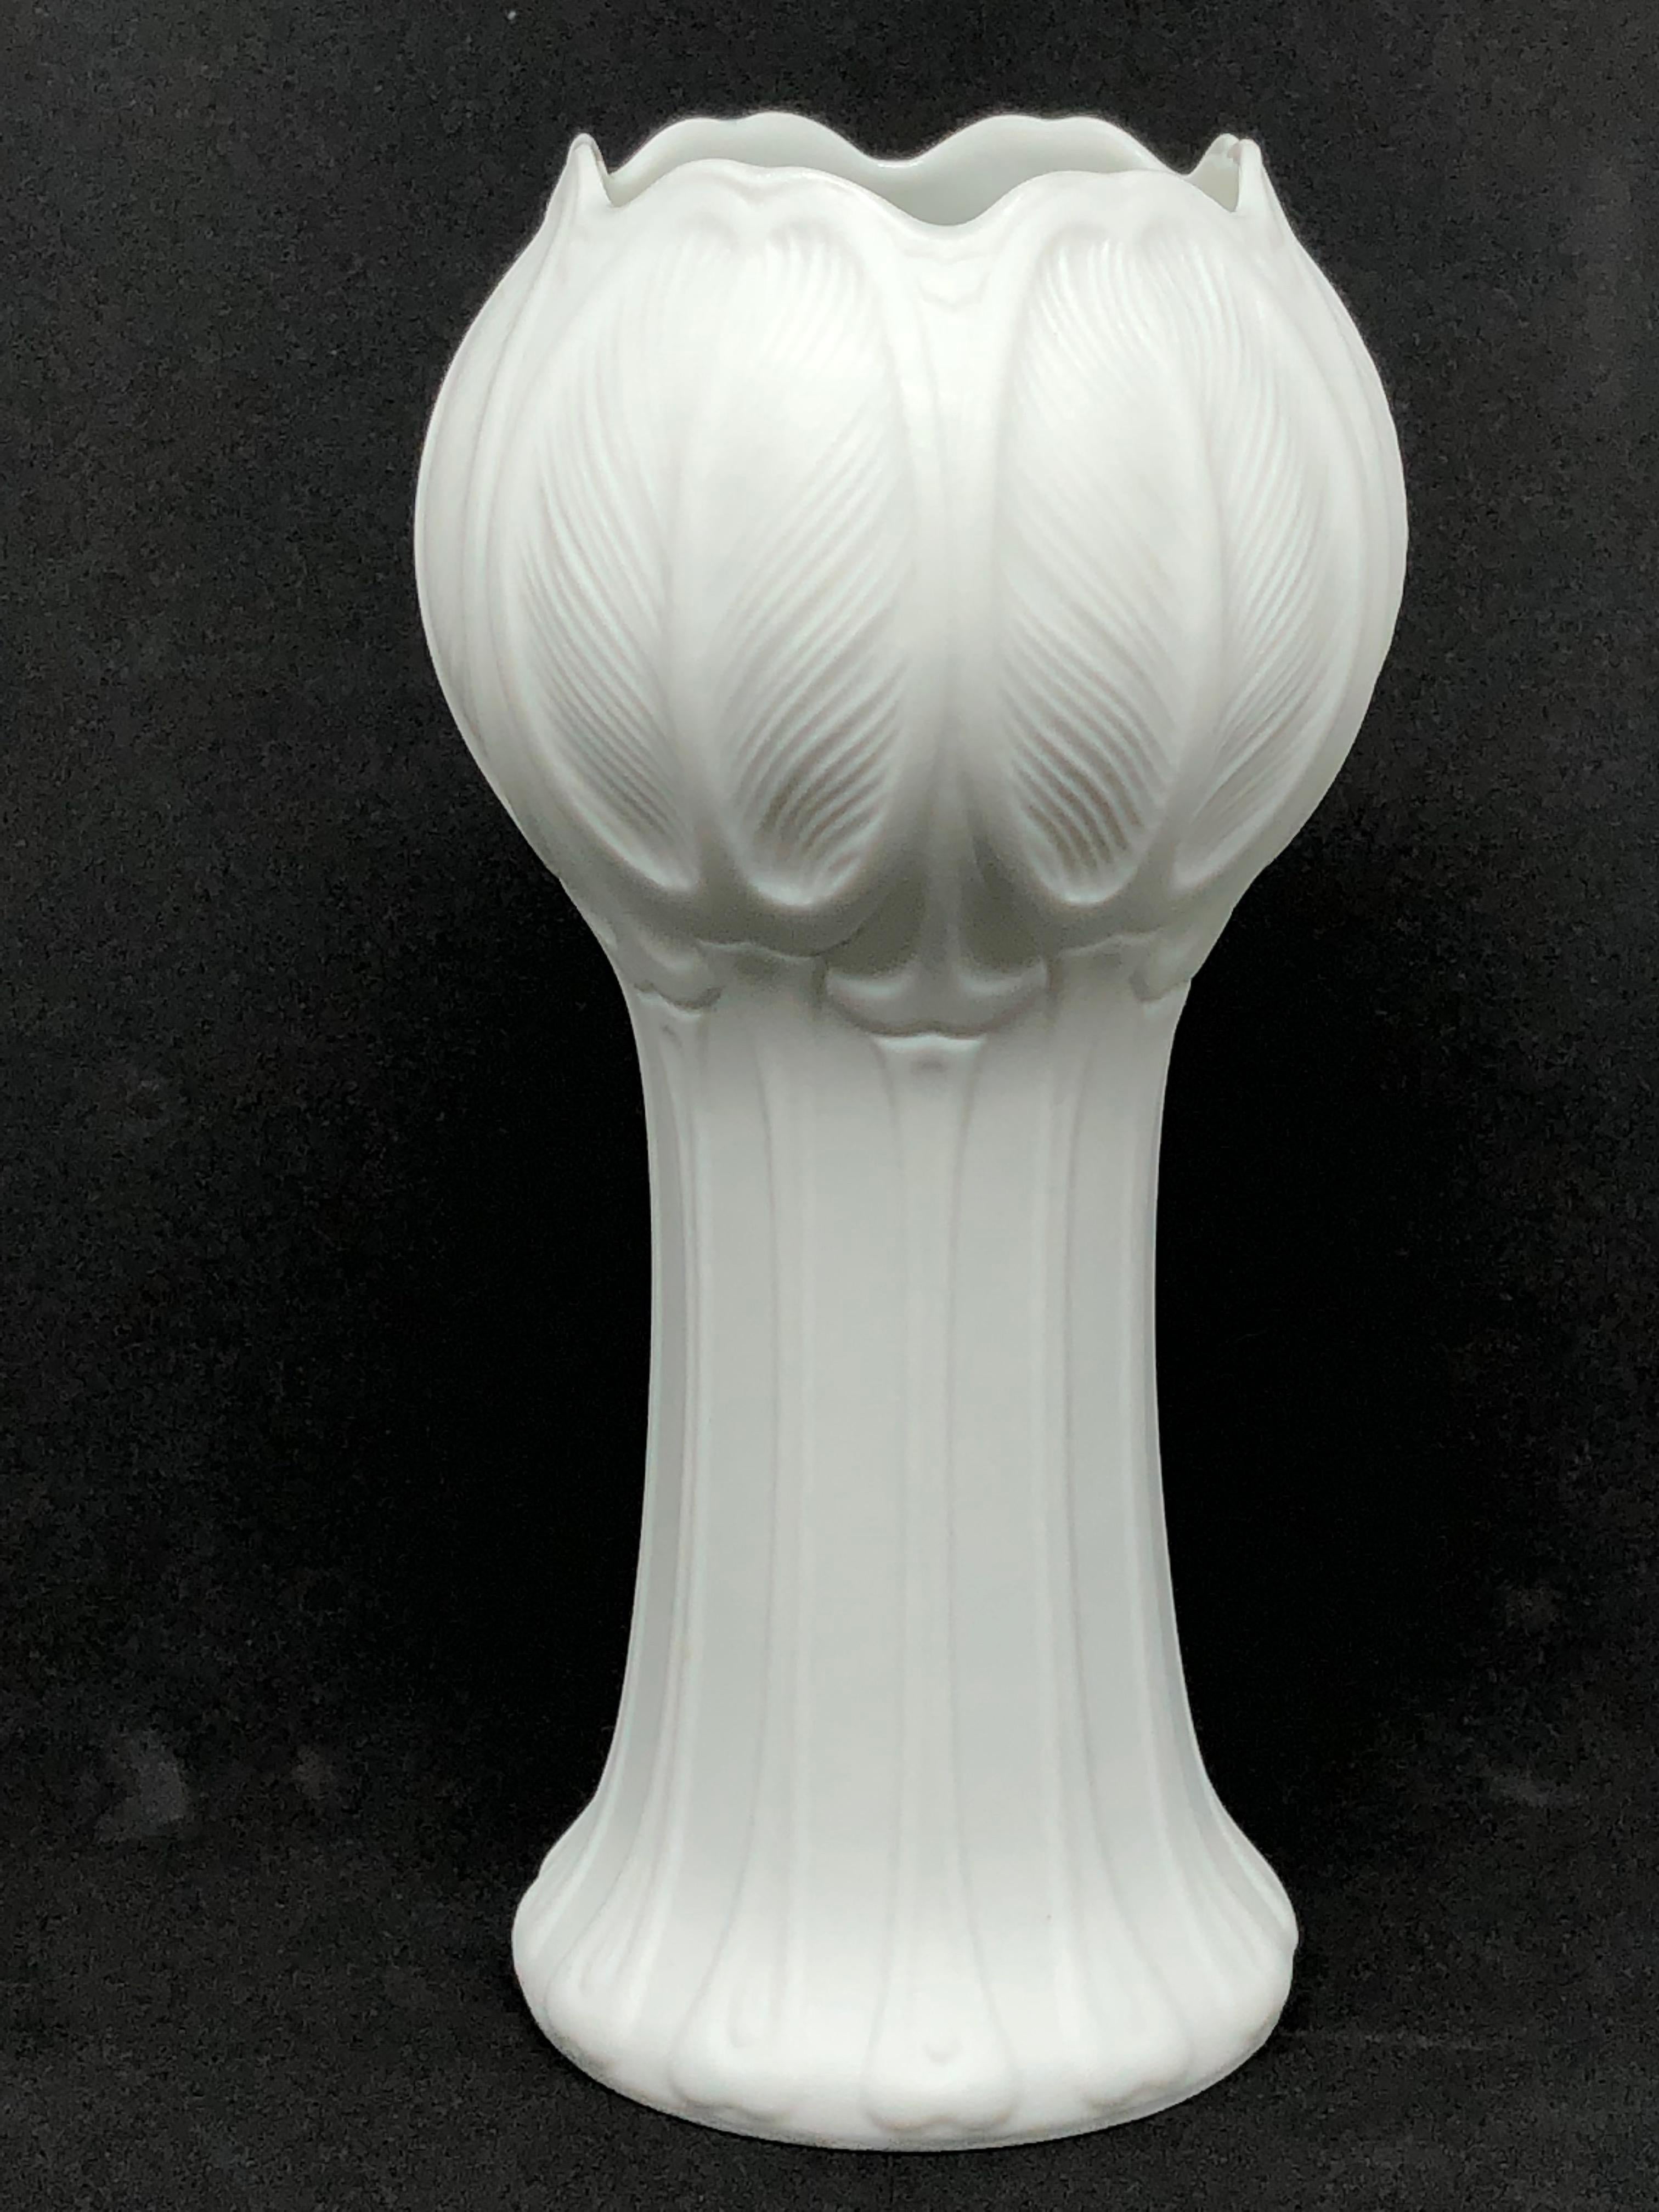 An amazing matte white vase designed in the 1960s by Hans Achtziger for the German art pottery maker Hutschenreuther. Vase is in very good condition with no chips, cracks, or flea bites. Signed with manufactory mark and item number. The name